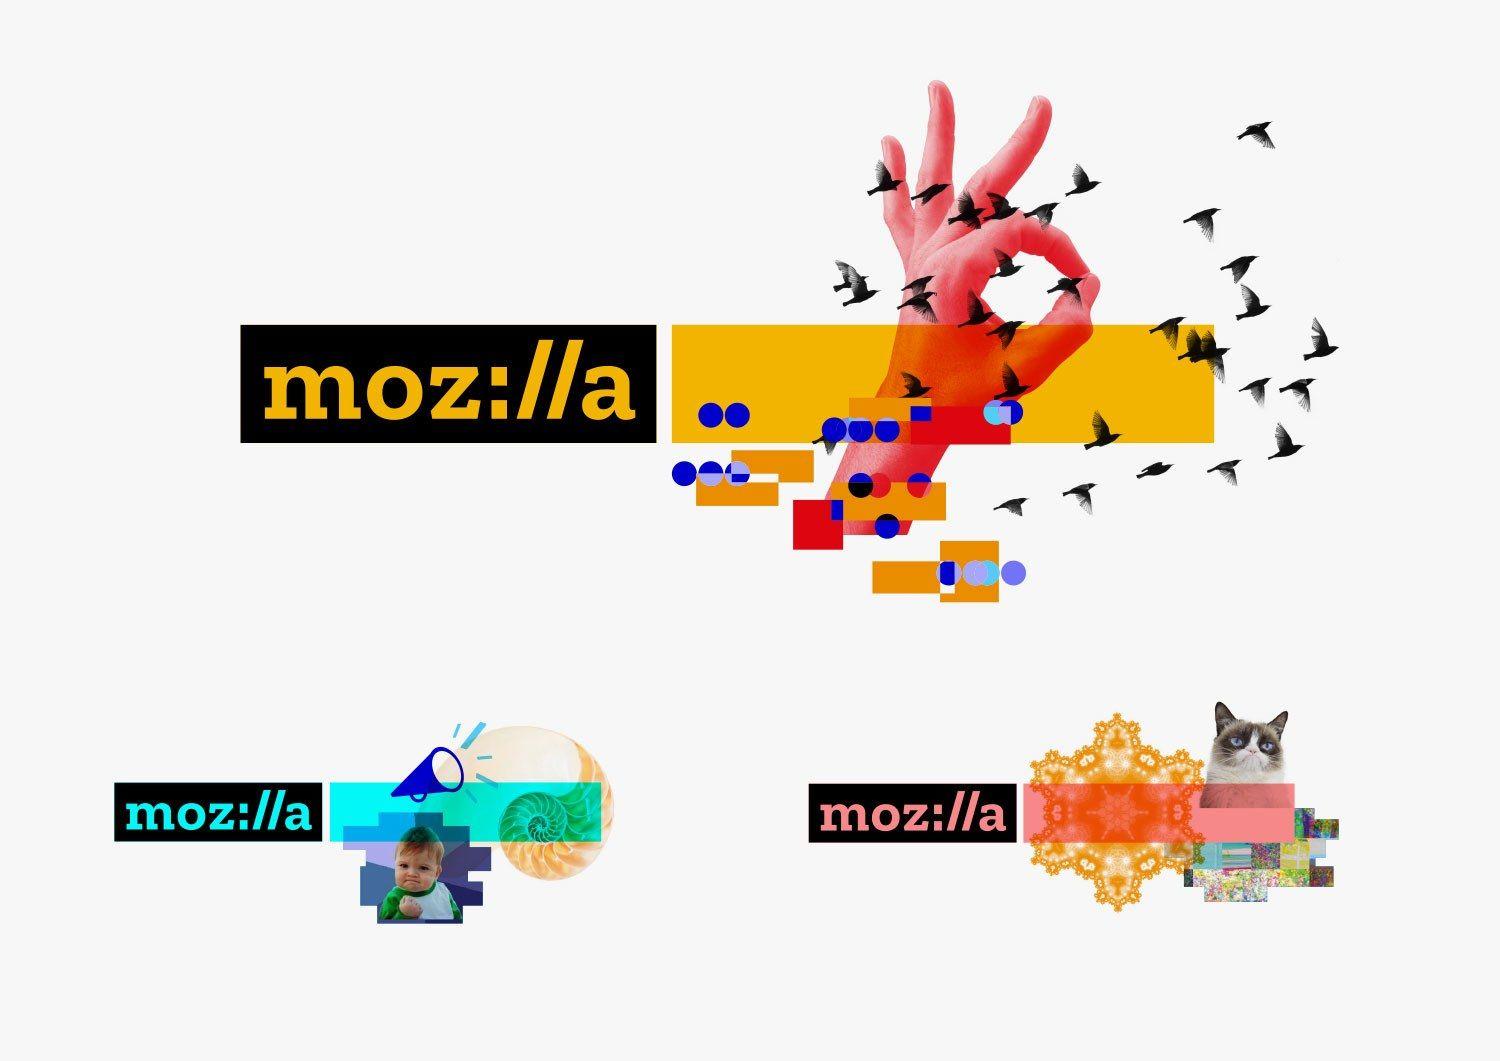 Wired.com Logo - Introducing Mozilla's New Logo, Moz://a. Get It? | WIRED